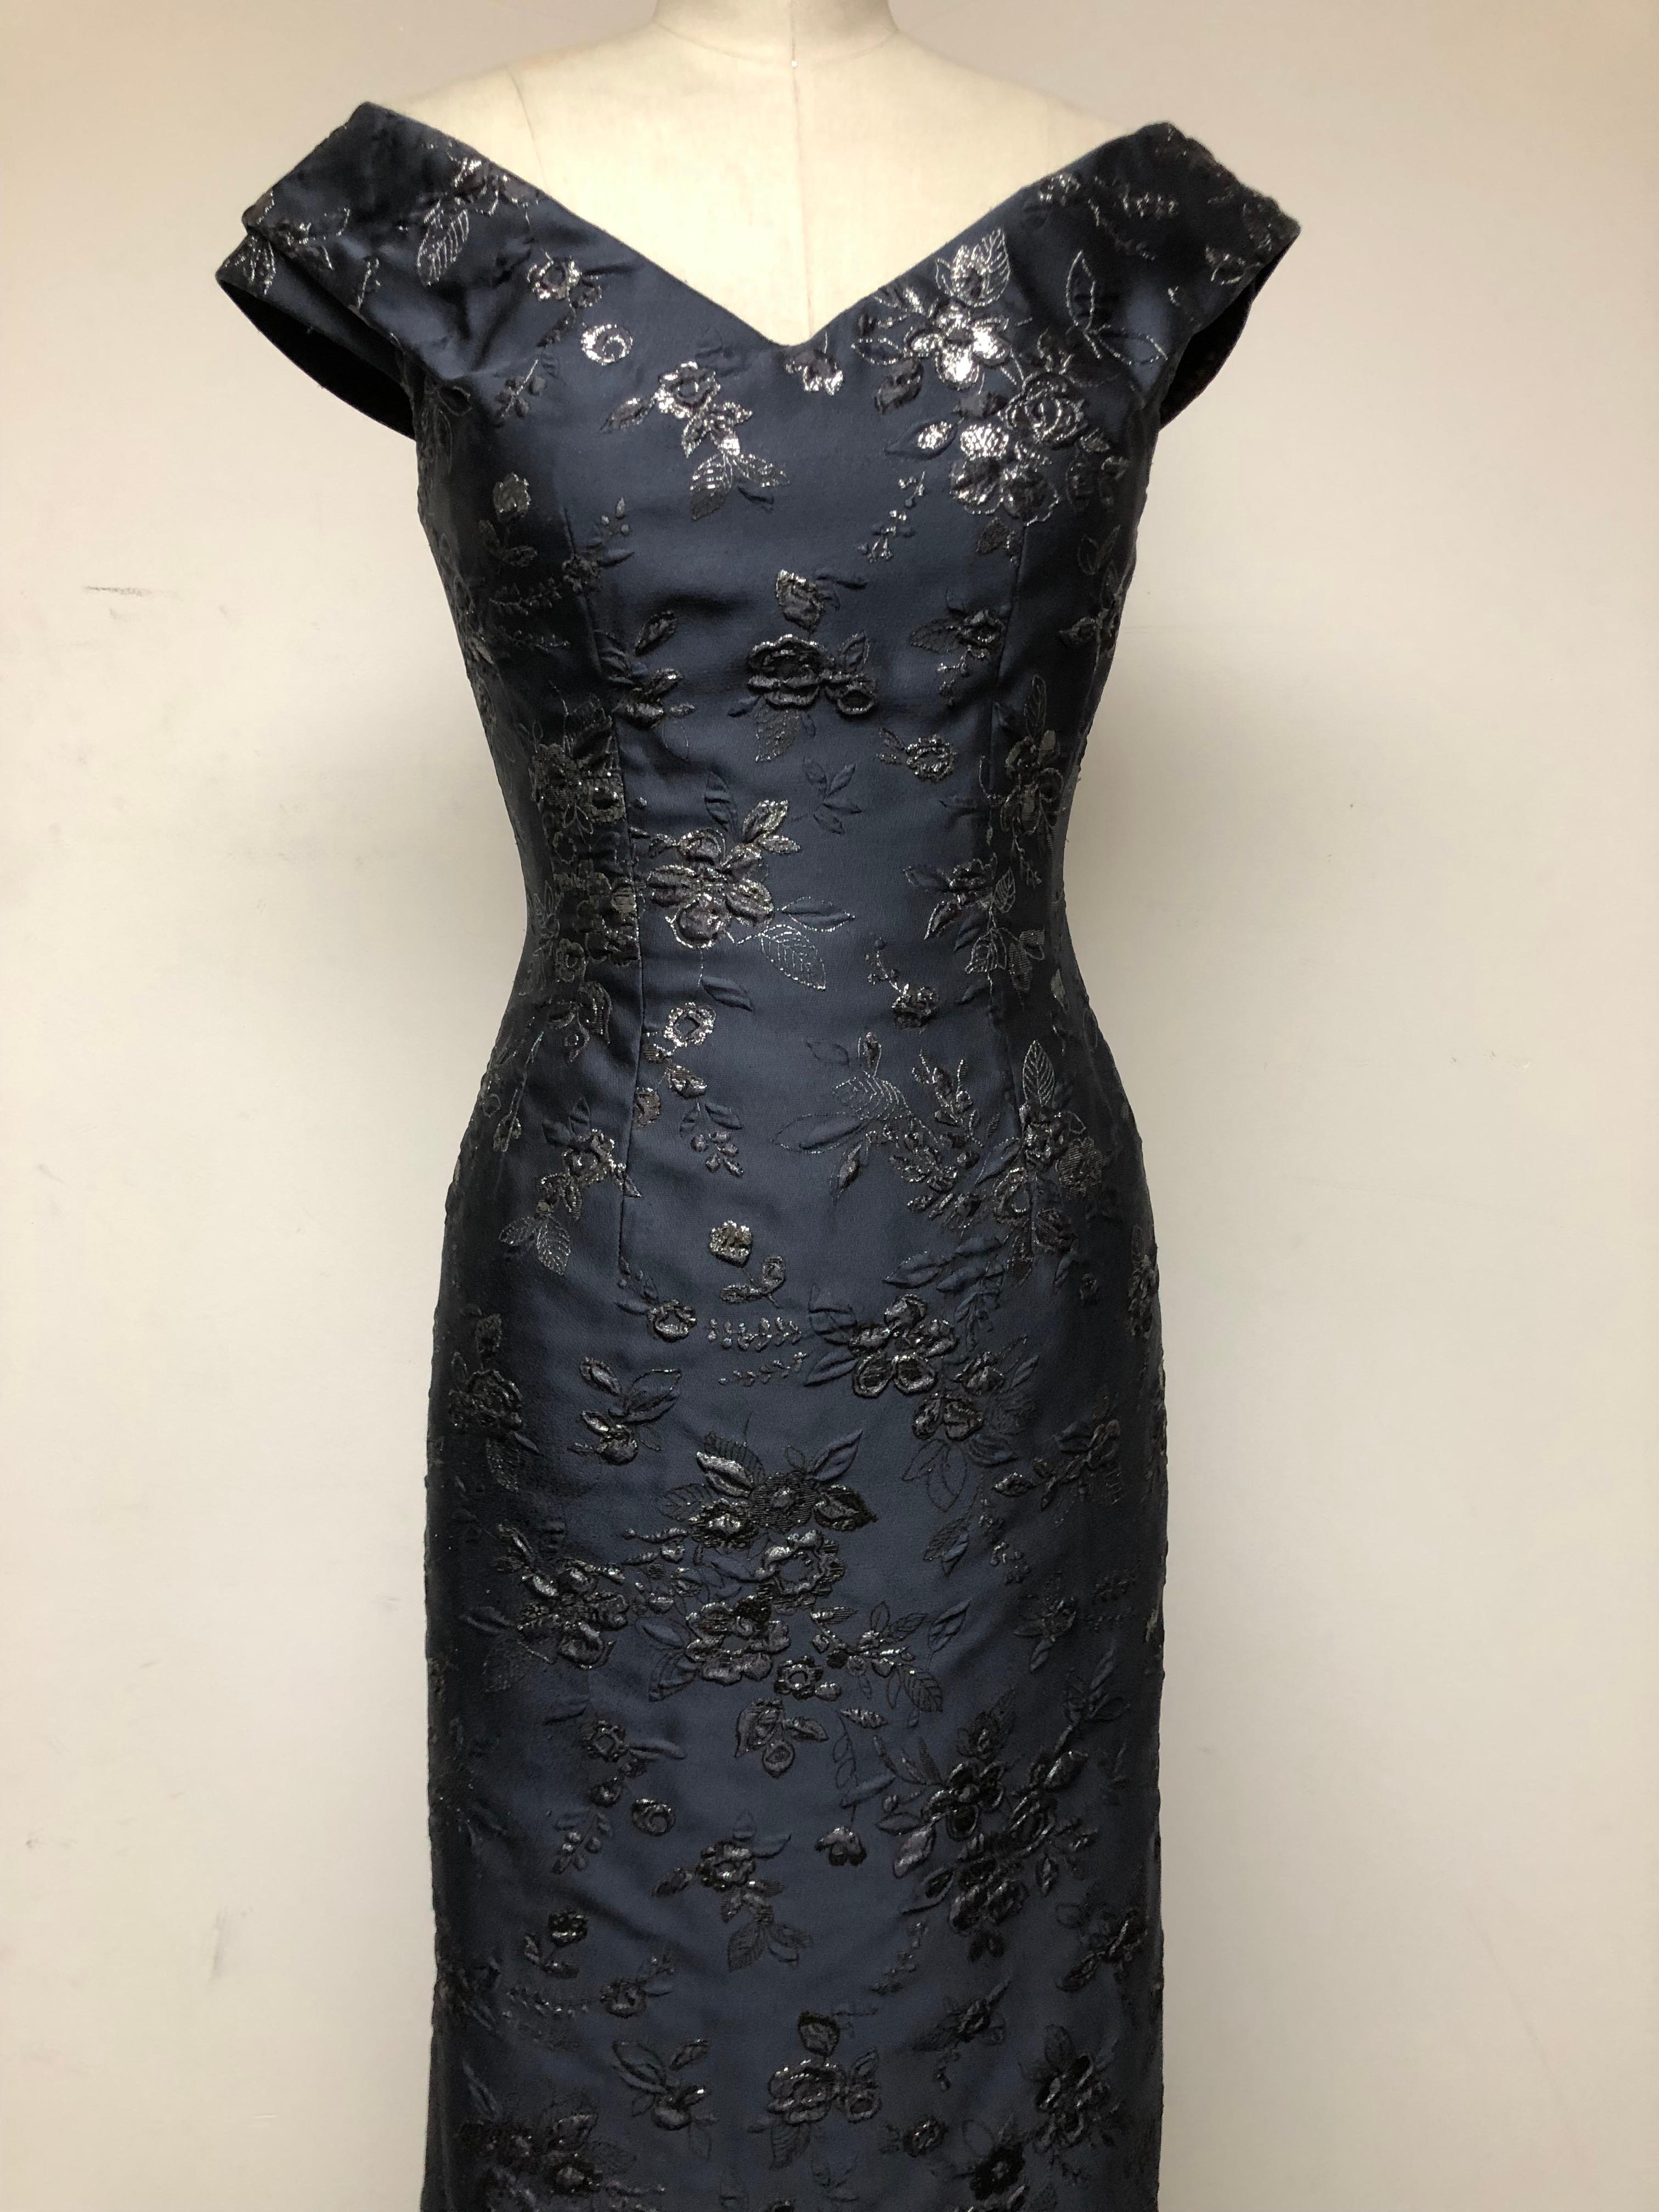 Silver Embroidery on Gunmetal Silk Blend Off the Shoulder Gown. An Internal Bustier is fully lined in matching silk and makes for comfort and a shapely silhouette. A train cascades along the back and leaves a memorable impression. Season-less and